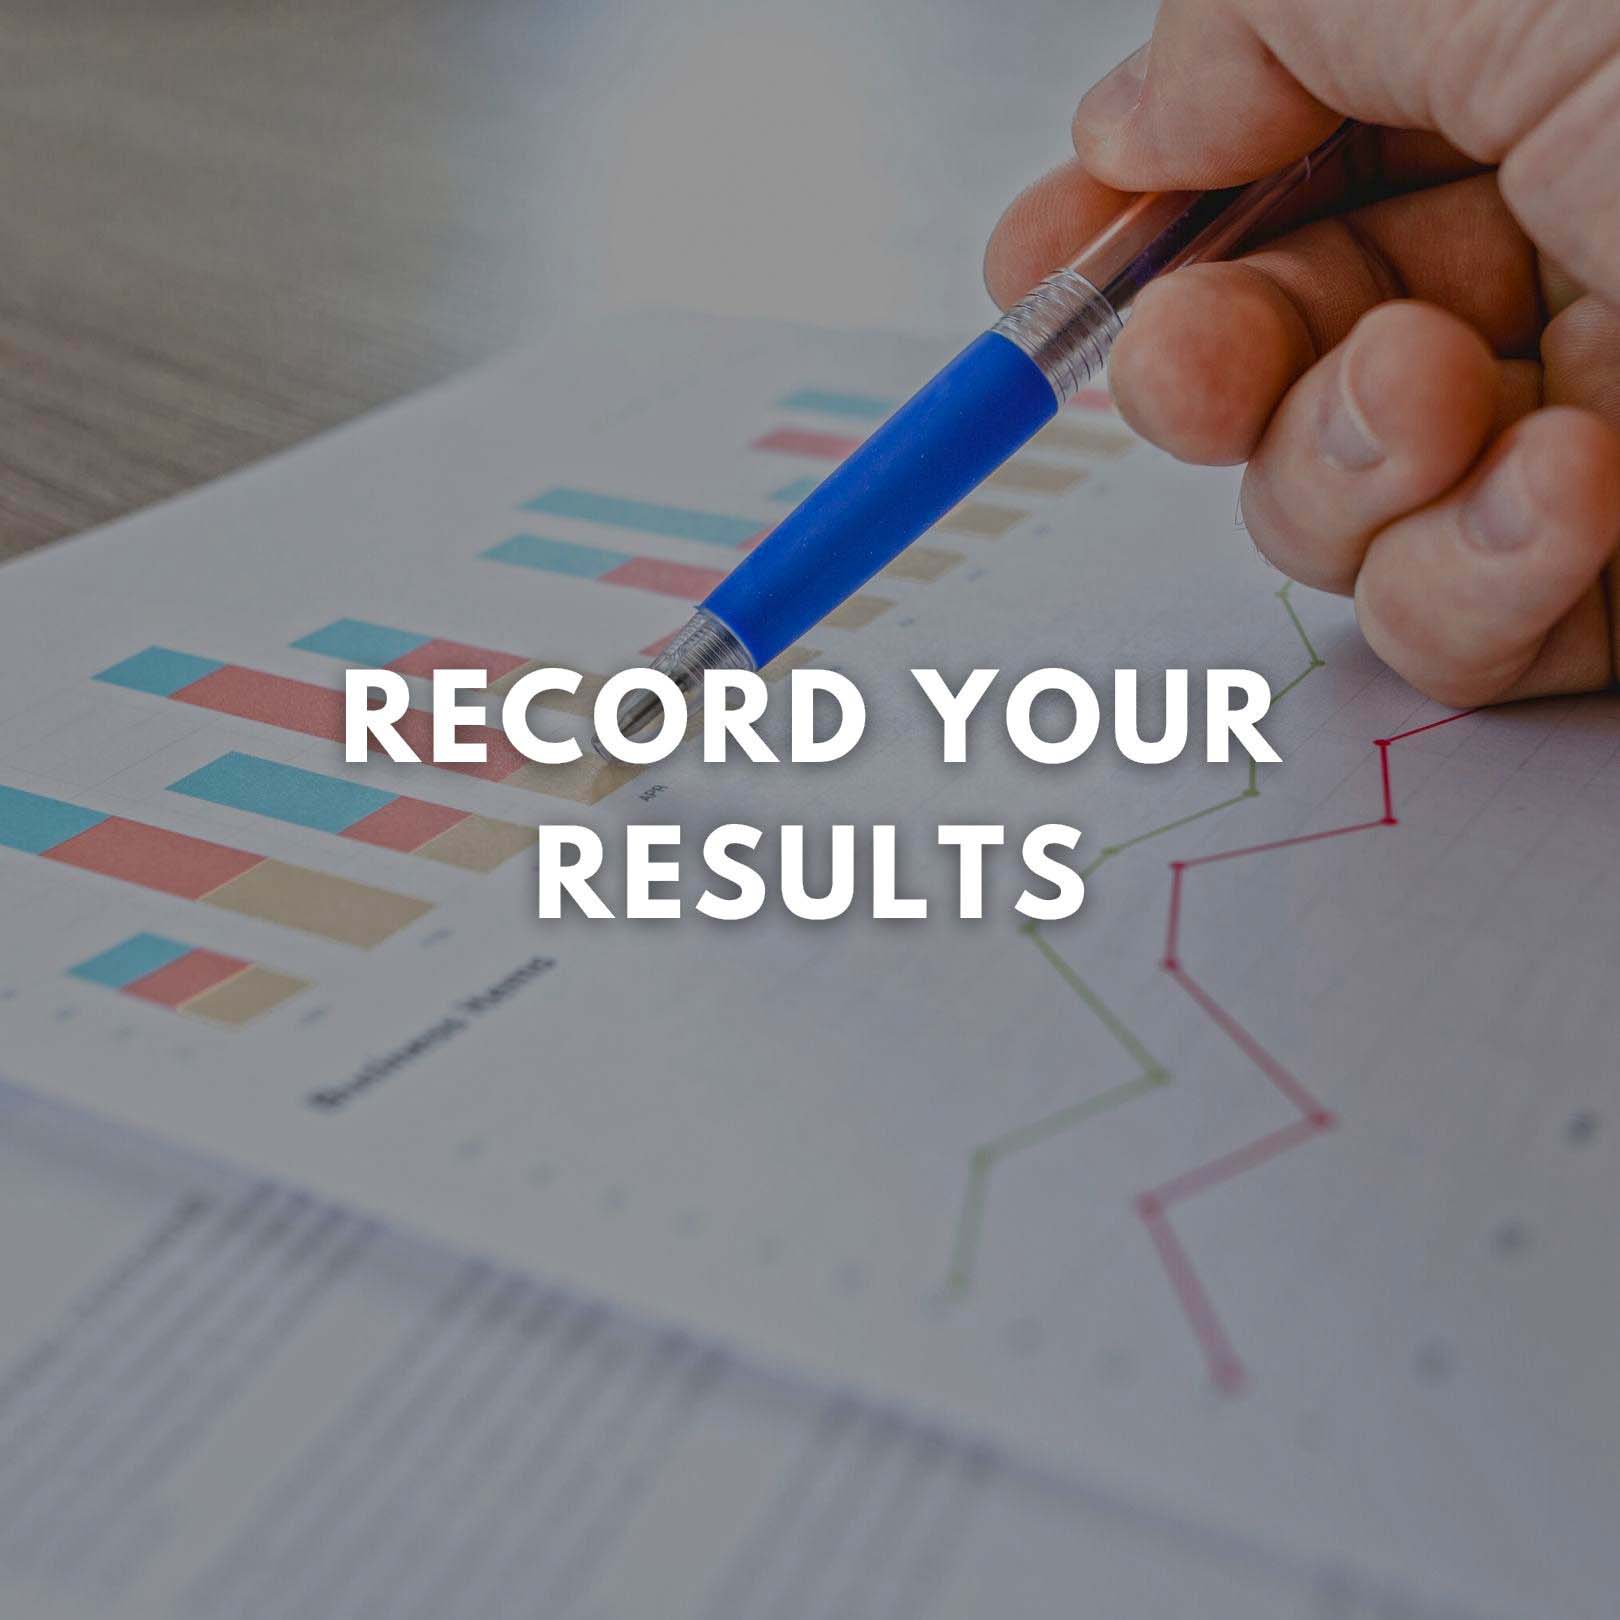 Record your blood test results